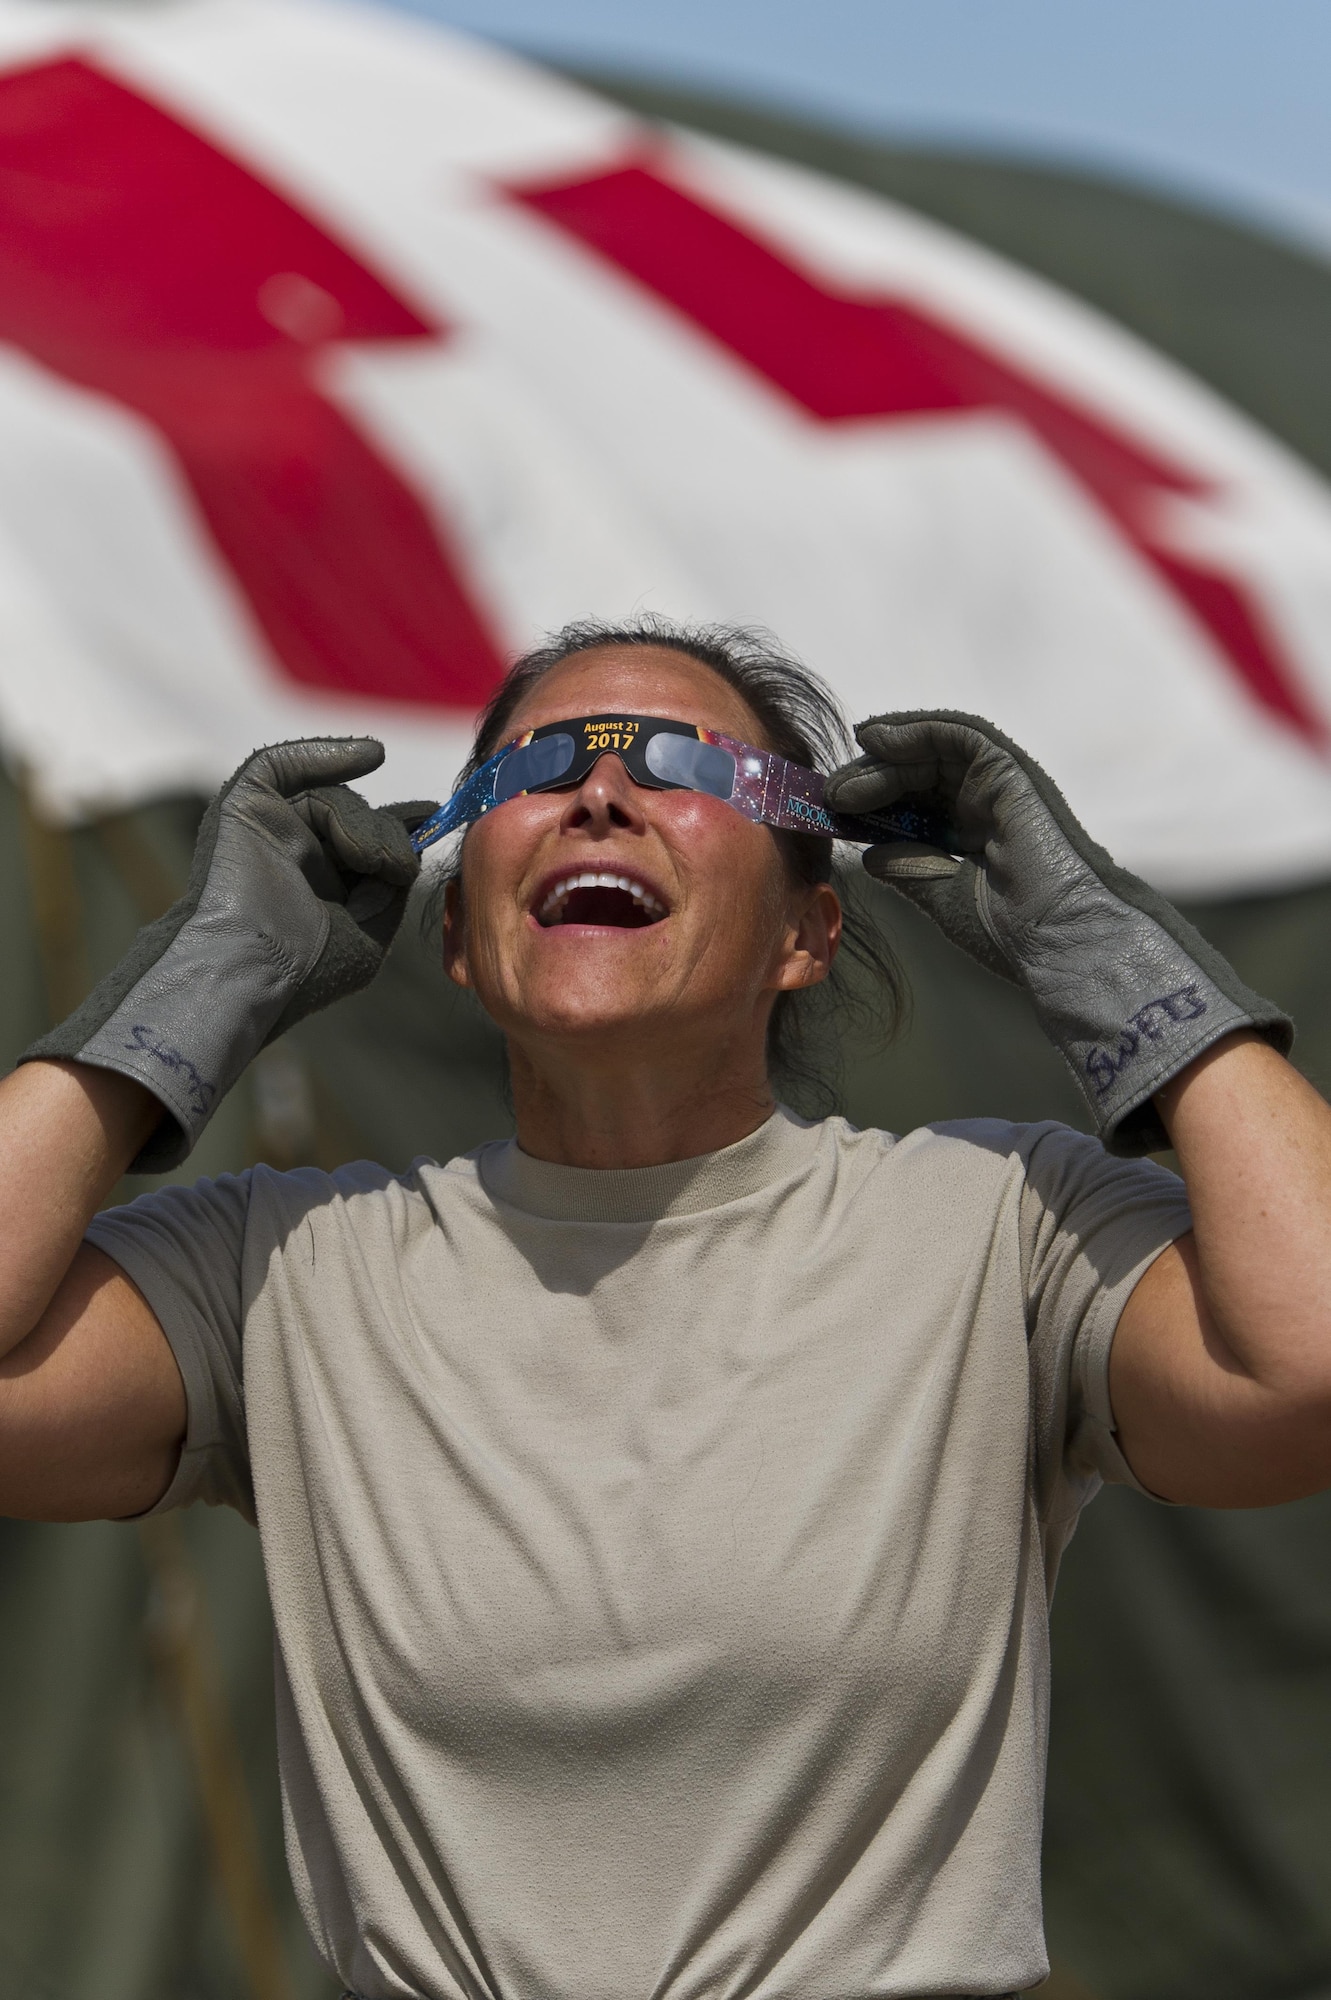 U.S. Air Force Lt. Col. Amy Swets, assigned to the 445th Aeromedical Staging Squadron, Wright-Patterson AFB, Ohio, observes through her eclipse glasses as the moon passes in front of the sun during a total solar eclipse at Young Air Assault Strip, Fort McCoy, Wis., Aug. 21, 2017, while participating in exercise Patriot Warrior. More than 600 Reserve Citizen Airmen and over 10,000 soldiers, sailors, Marines and international partners converged on the state of Wisconsin to support a range of interlinked exercises including Patriot Warrior, Global Medic, CSTX, Diamond Saber, and Mortuary Affairs Exercise (MAX).  Patriot Warrior is Air Force Reserve Command's premier exercise, providing an opportunity for Reserve Citizen Airmen to train with joint and international partners in airlift, aeromedical evacuation and mobility support.  This exercise is intended to test the ability of the Air Force Reserve to provide combat-ready forces to operate in dynamic, contested environments and to sharpen Citizen Airmen's skills in supporting combatant commander requirements. ( U.S. Air Force Photo by Tech. Sgt. Efren Lopez )